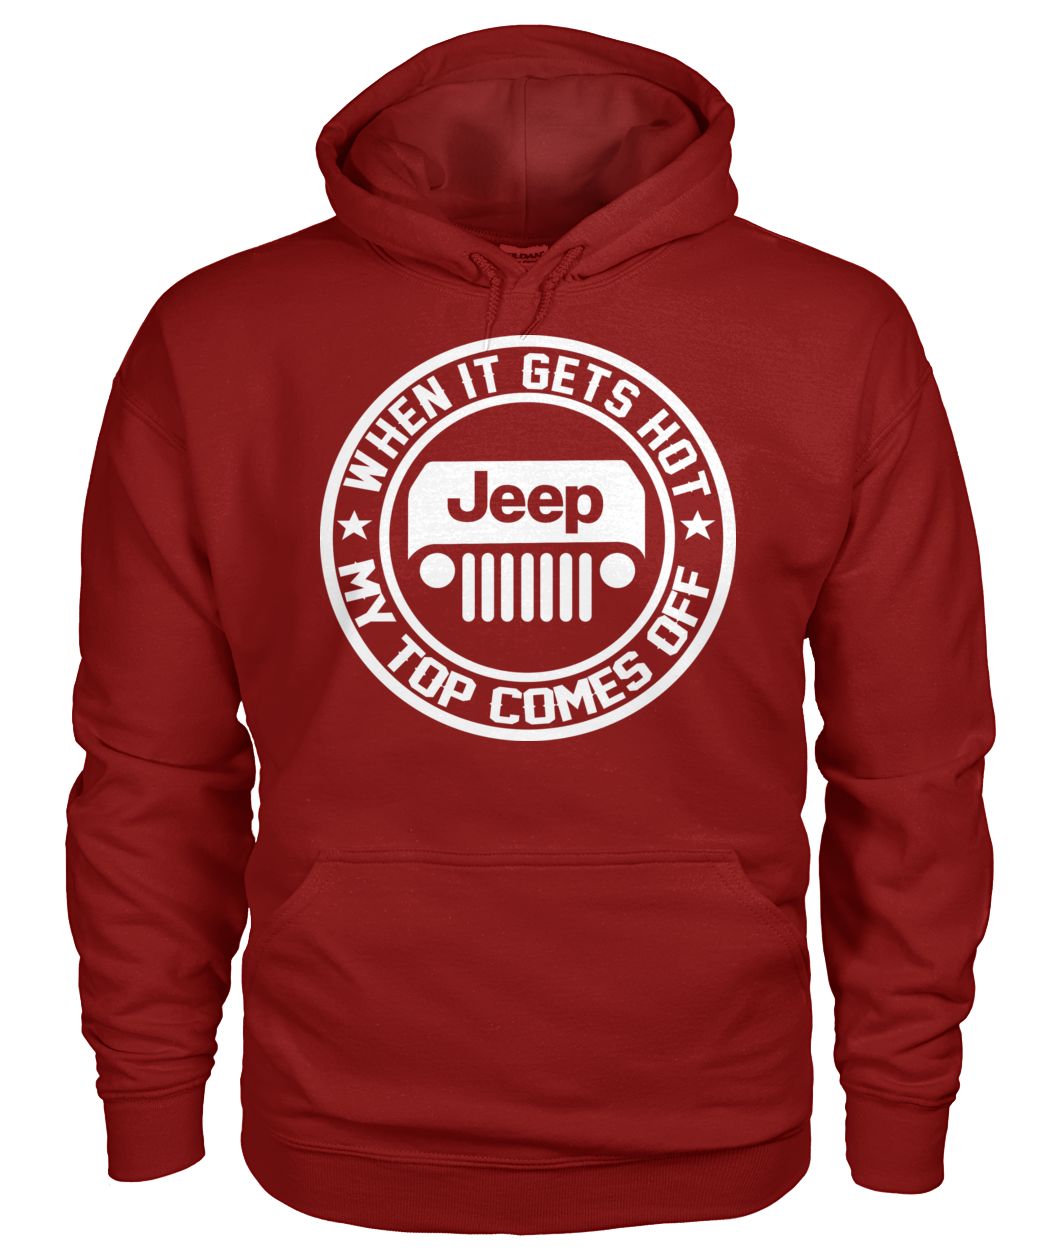 When it gets hot my top comes off jeep gildan hoodie